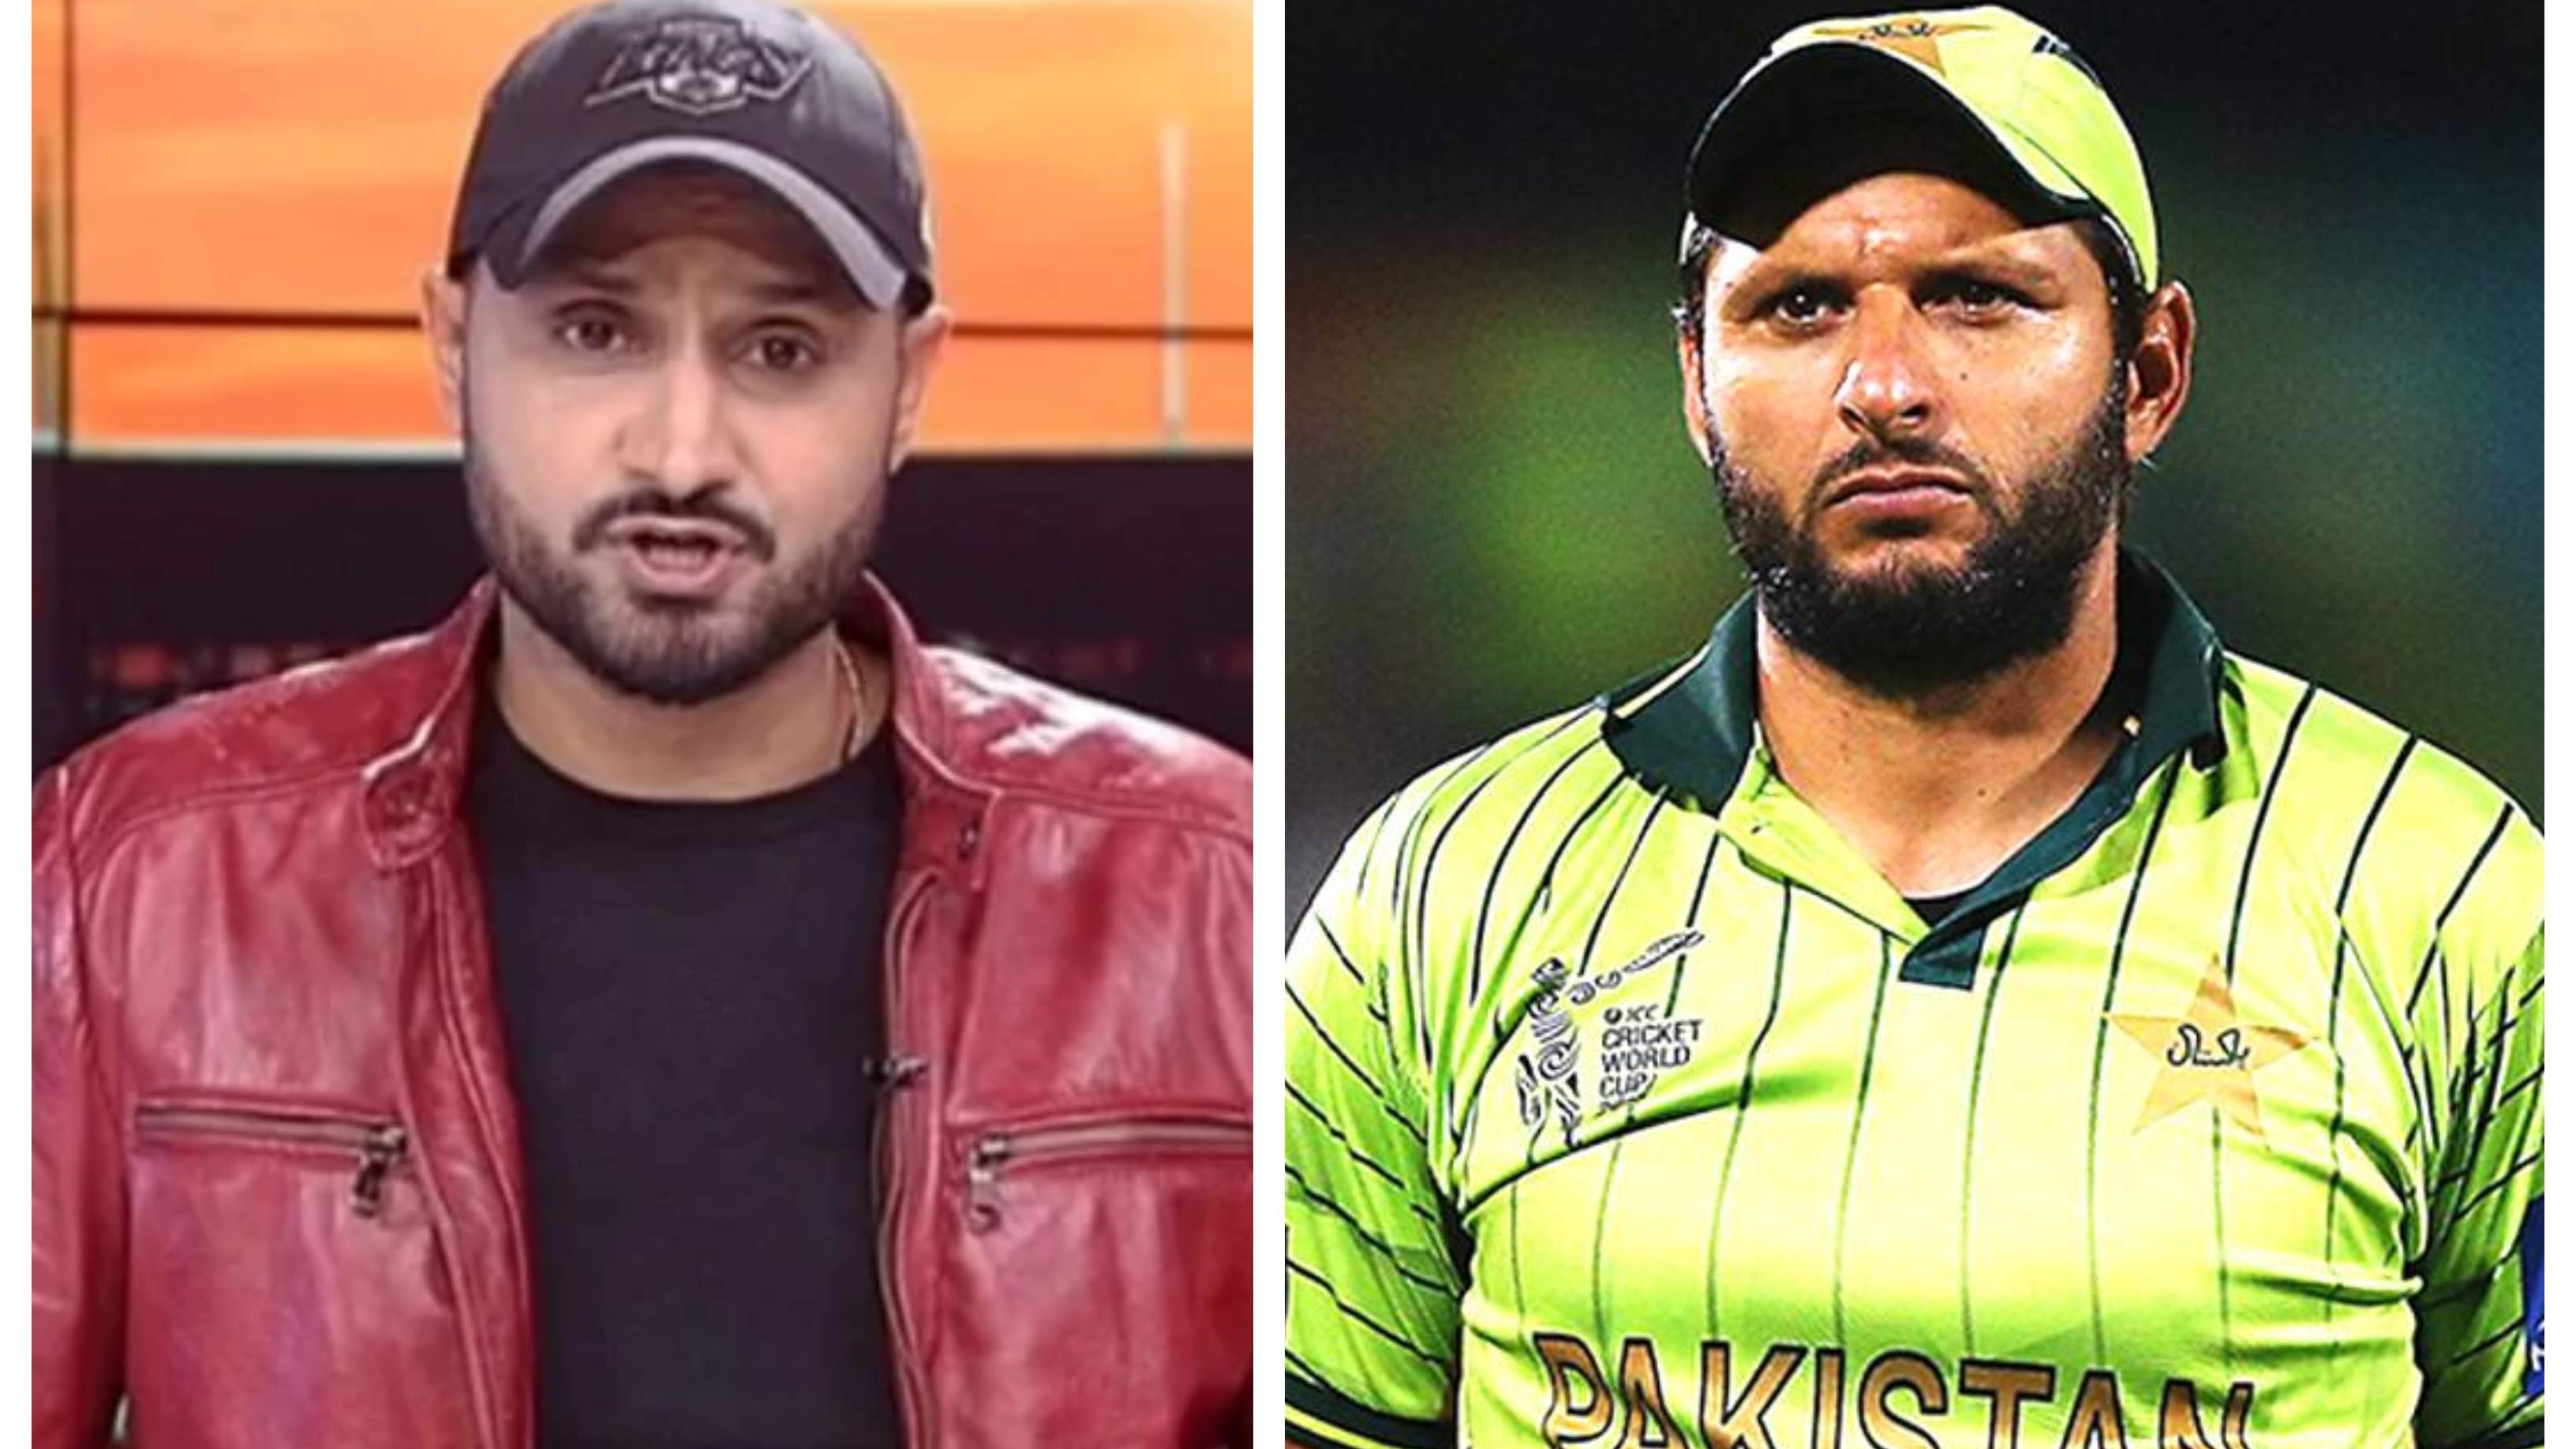 ‘He should stay in his country and limits’: Harbhajan slams Afridi over controversial Kashmir remarks